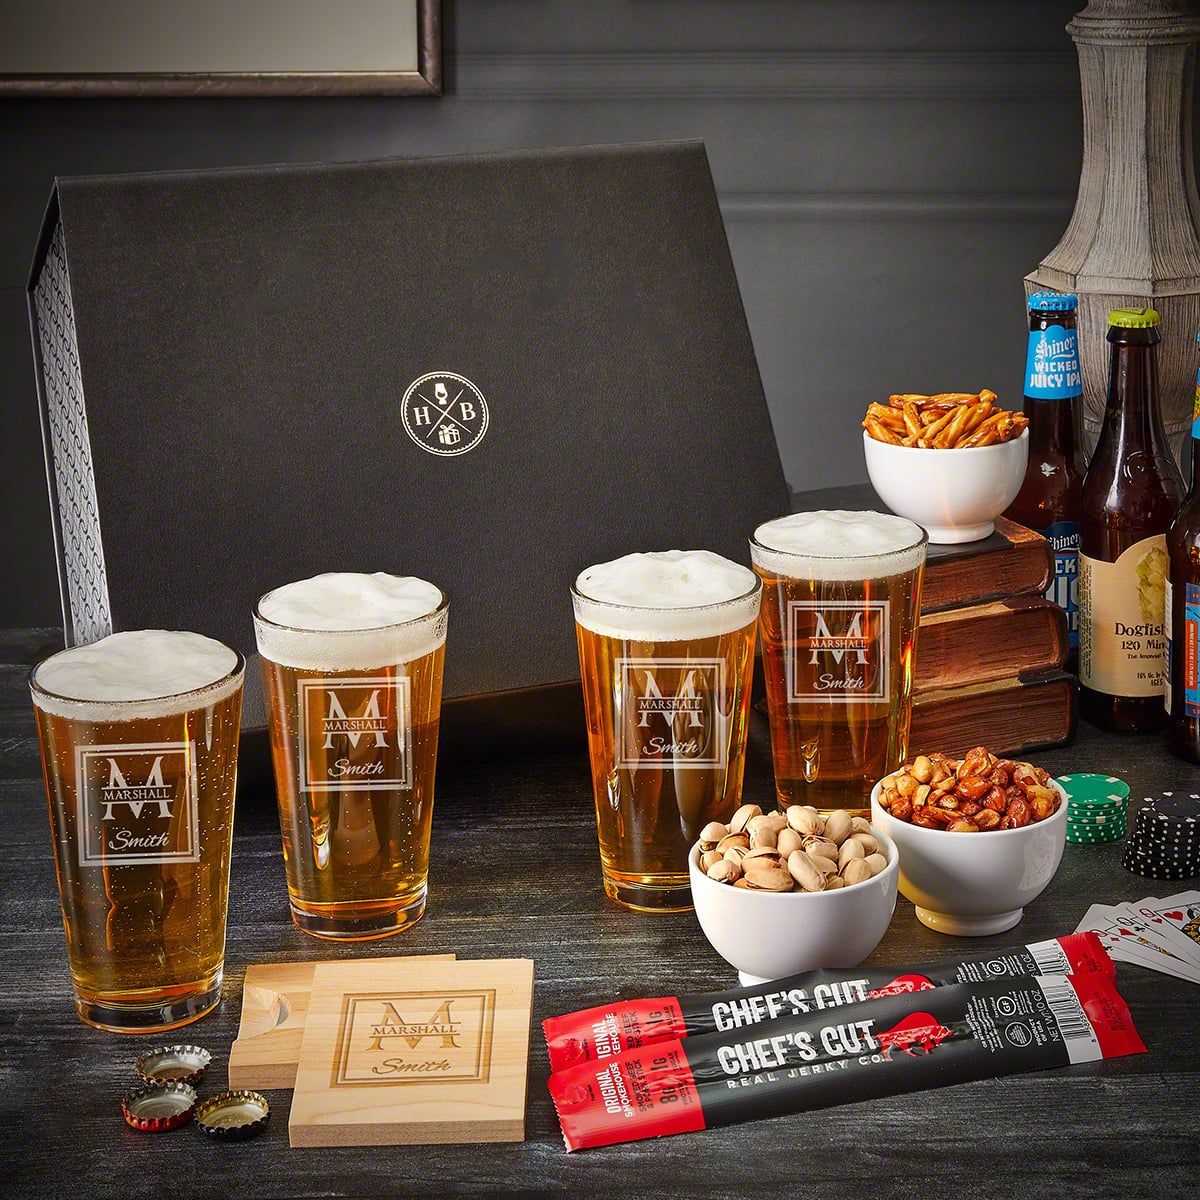 https://images.homewetbar.com/media/catalog/product/4/-/4-pint-glass-luxury-box-set-with-snacks-and-bottle-opener-coasters-oakhill-p_10758_1_.jpg?store=default&image-type=image